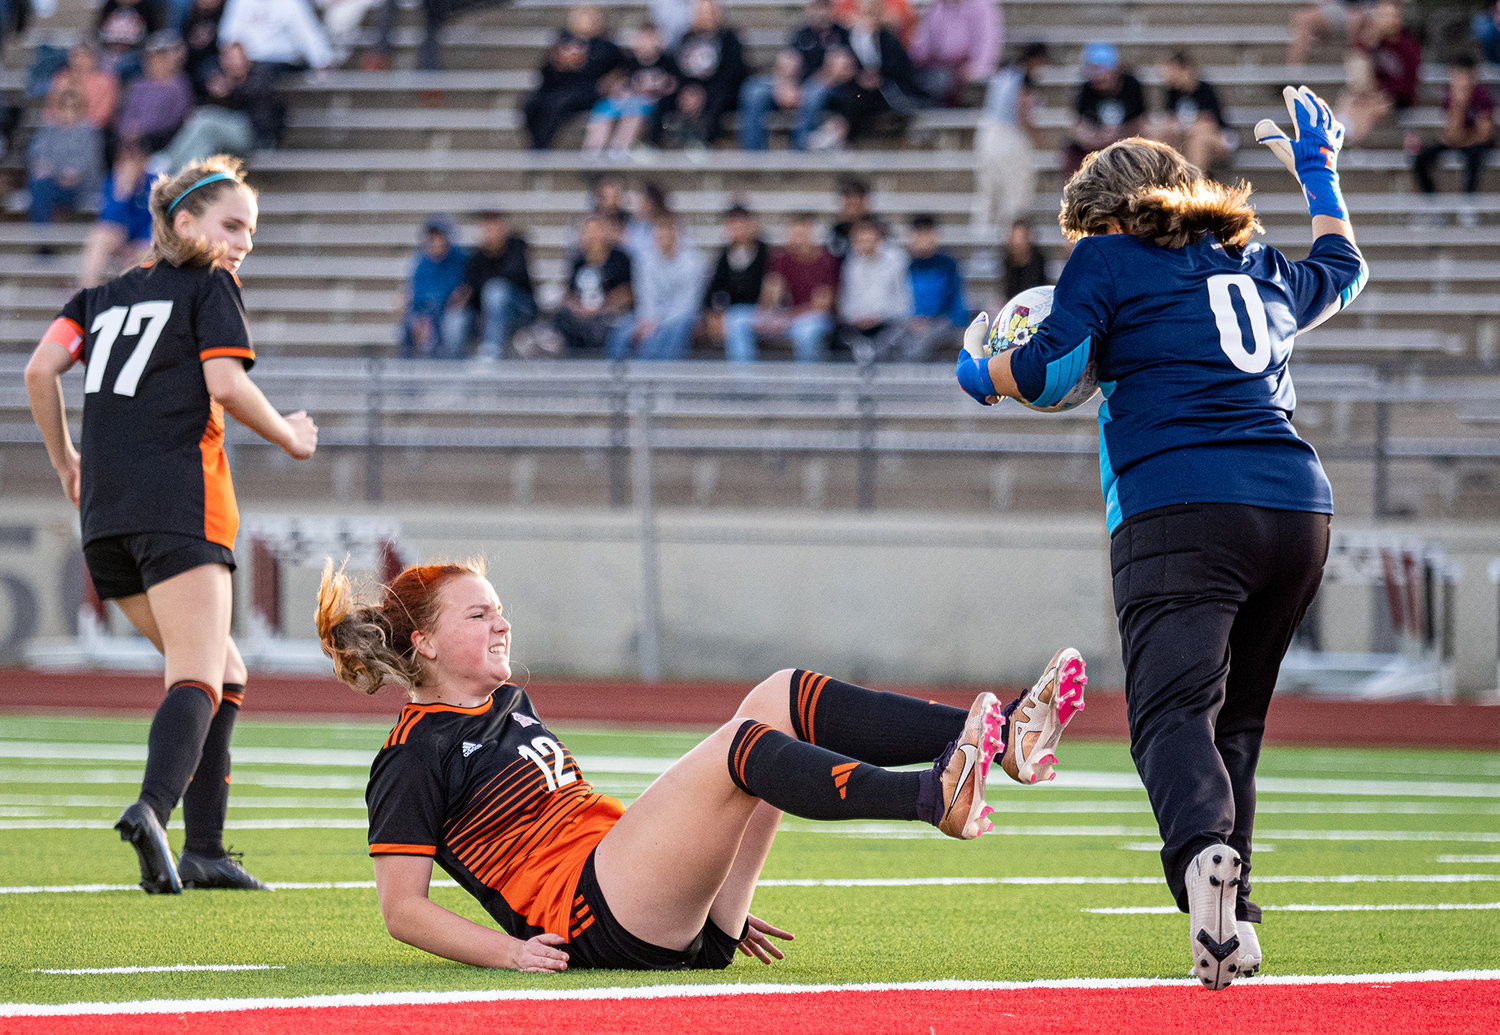 Katie Cox gets knocked down by the Northside goalkeeper while attempting to put a shot on goal during bi-district action on Friday, March 24.